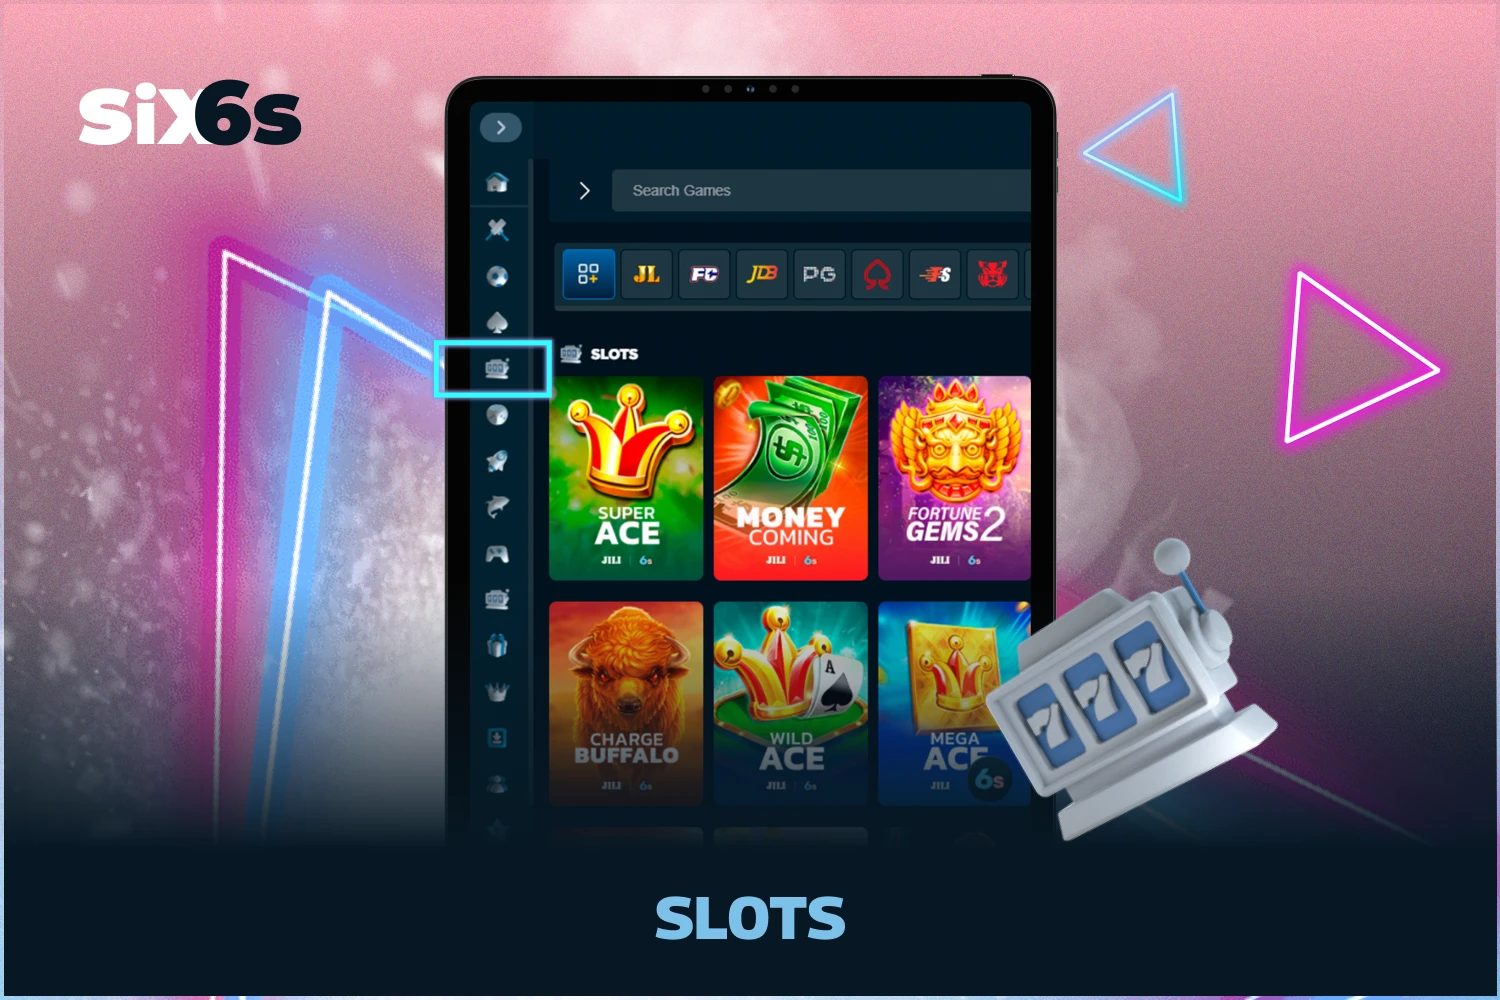 The Slots section featured at Six6s Casino contains some of the most popular slots in Bangladesh